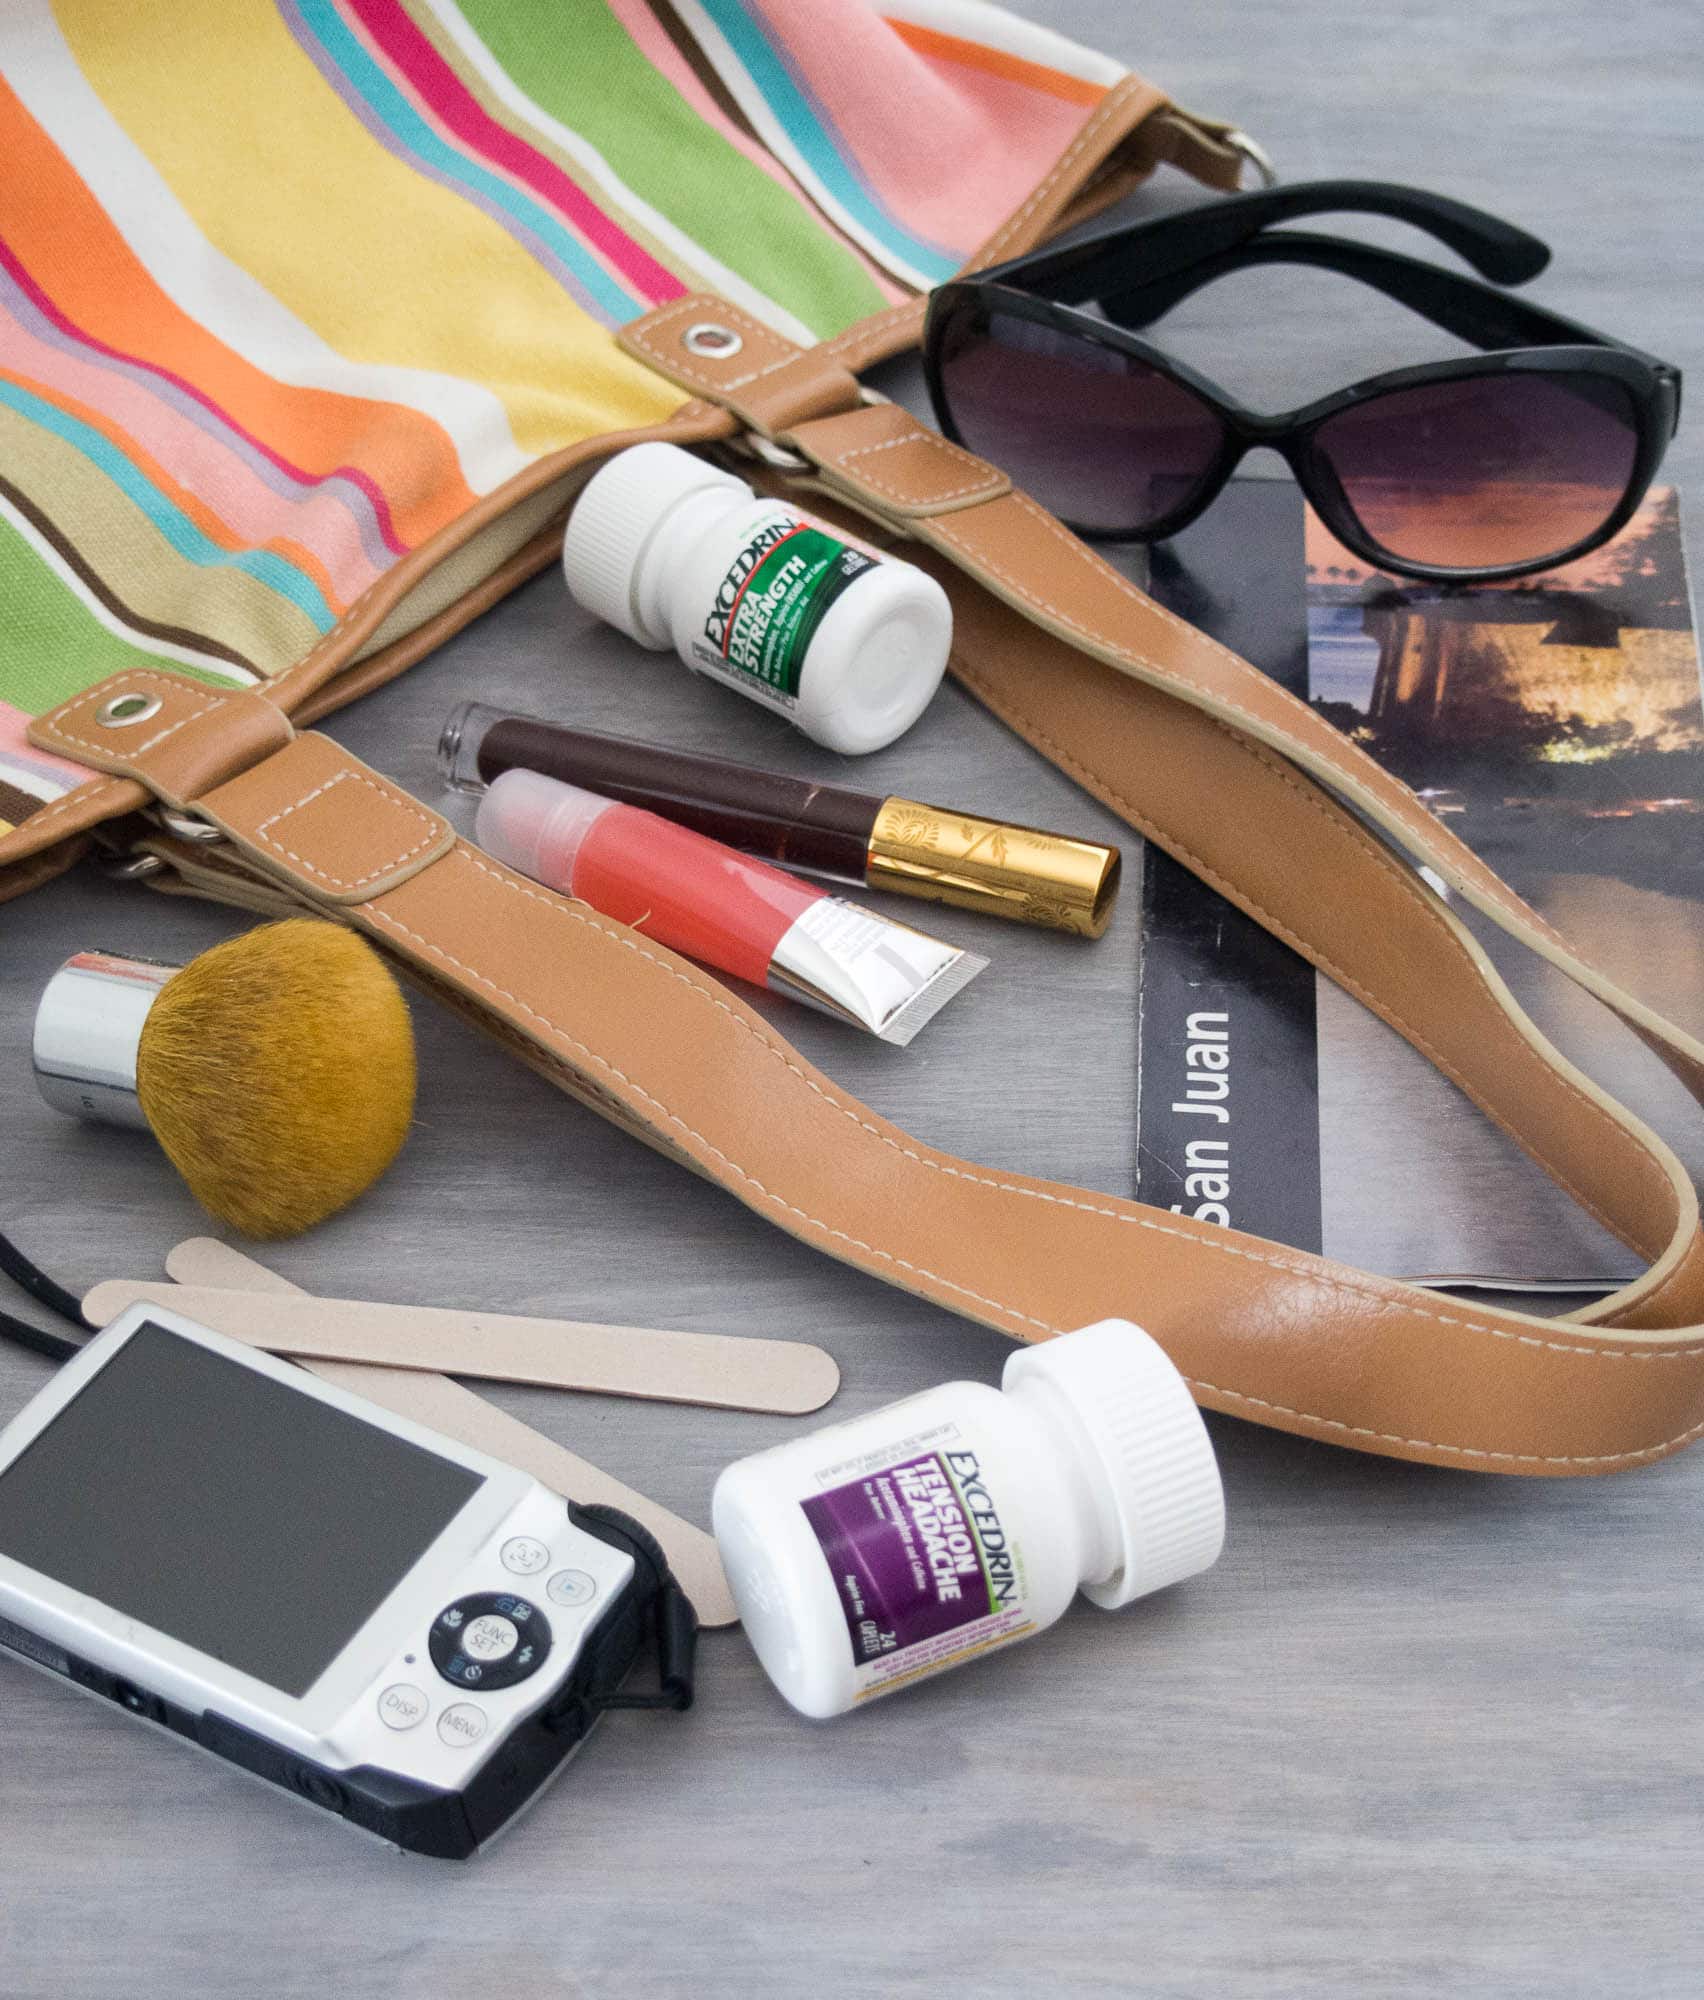 A purse with sunglasses, a cell phone, and other items.